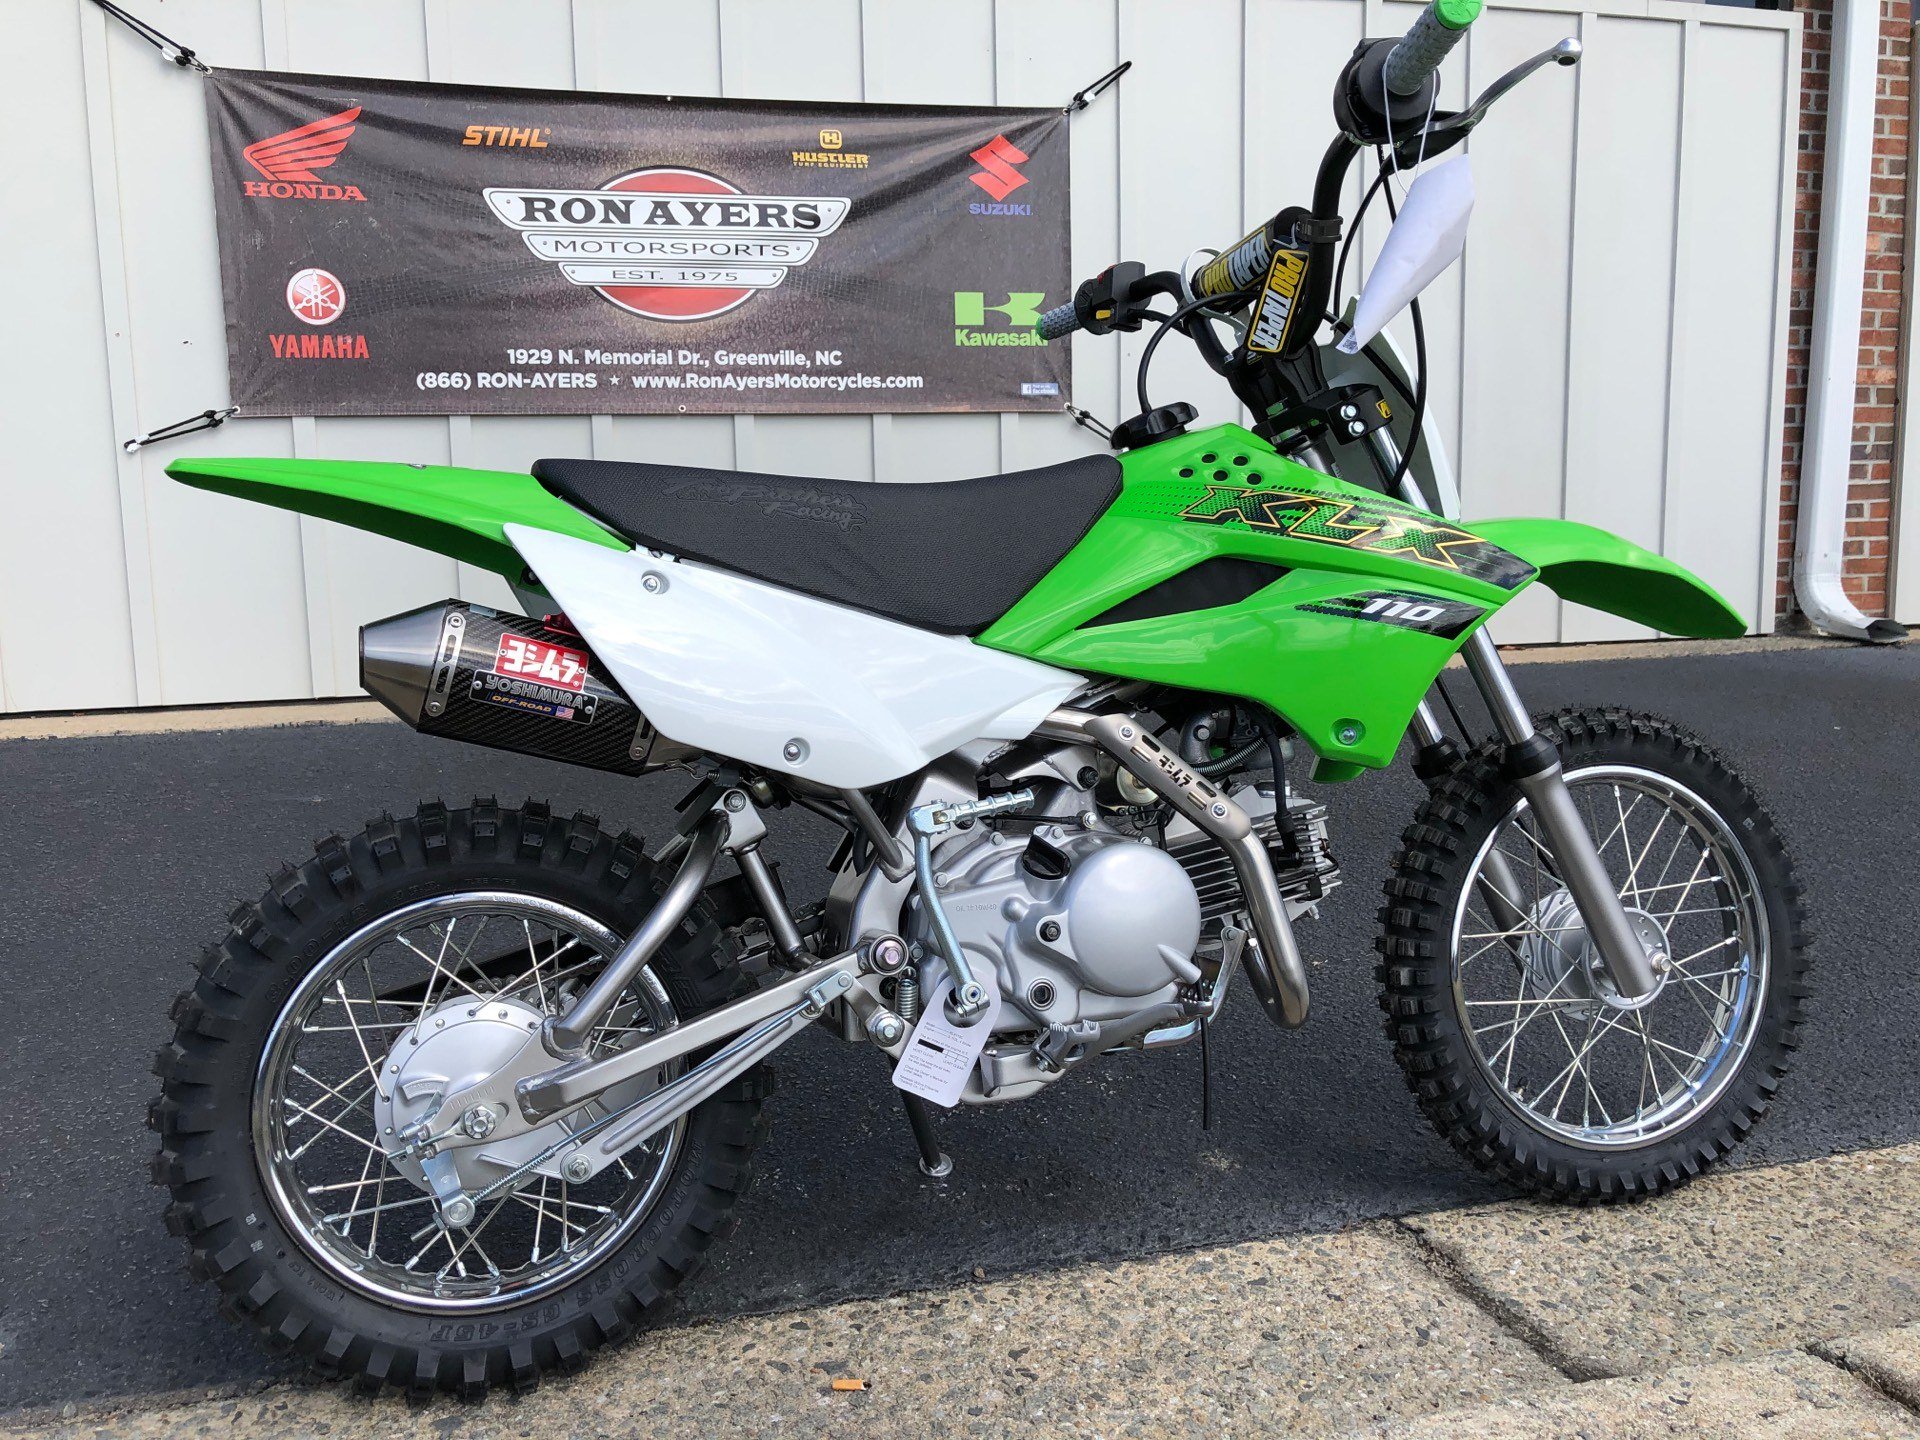 New 2020 Kawasaki KLX 110 Motorcycles in Greenville, NC | Stock Number: N/A